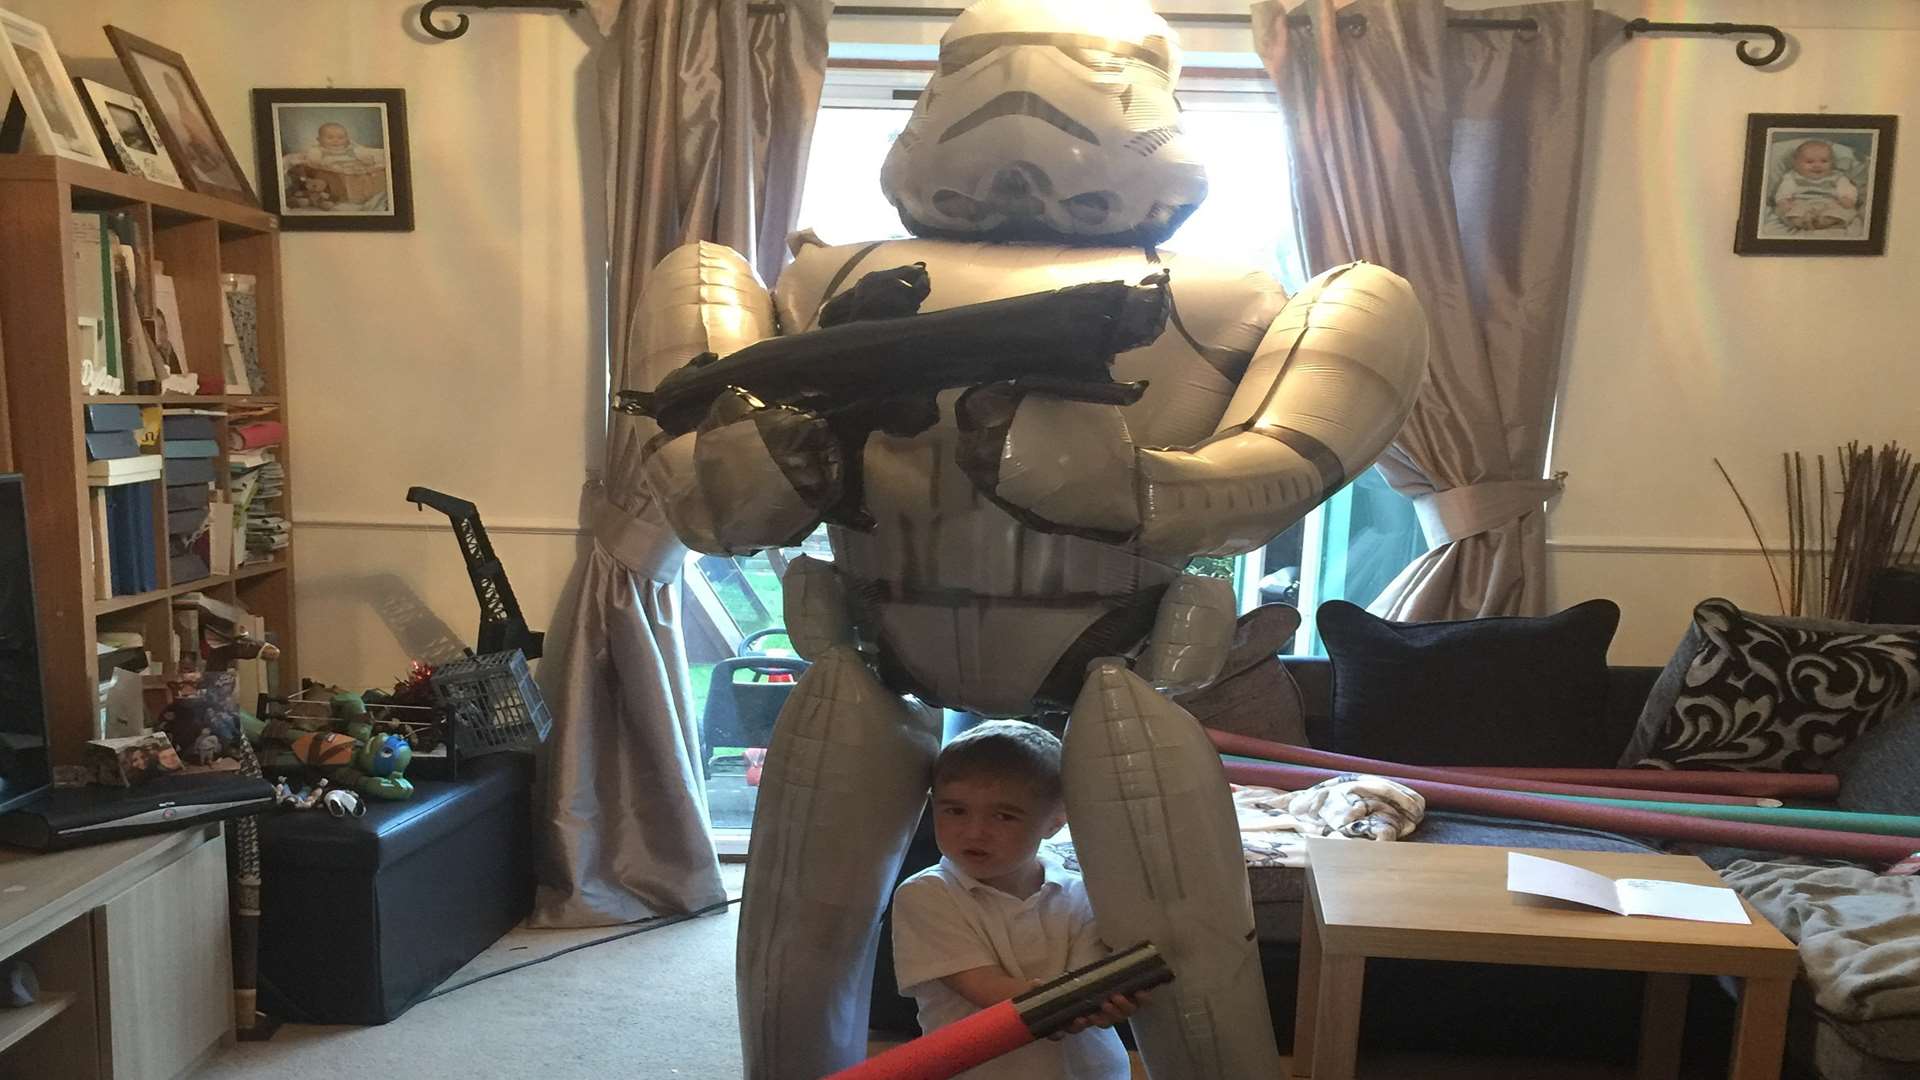 Dylan and his Stormtrooper balloon